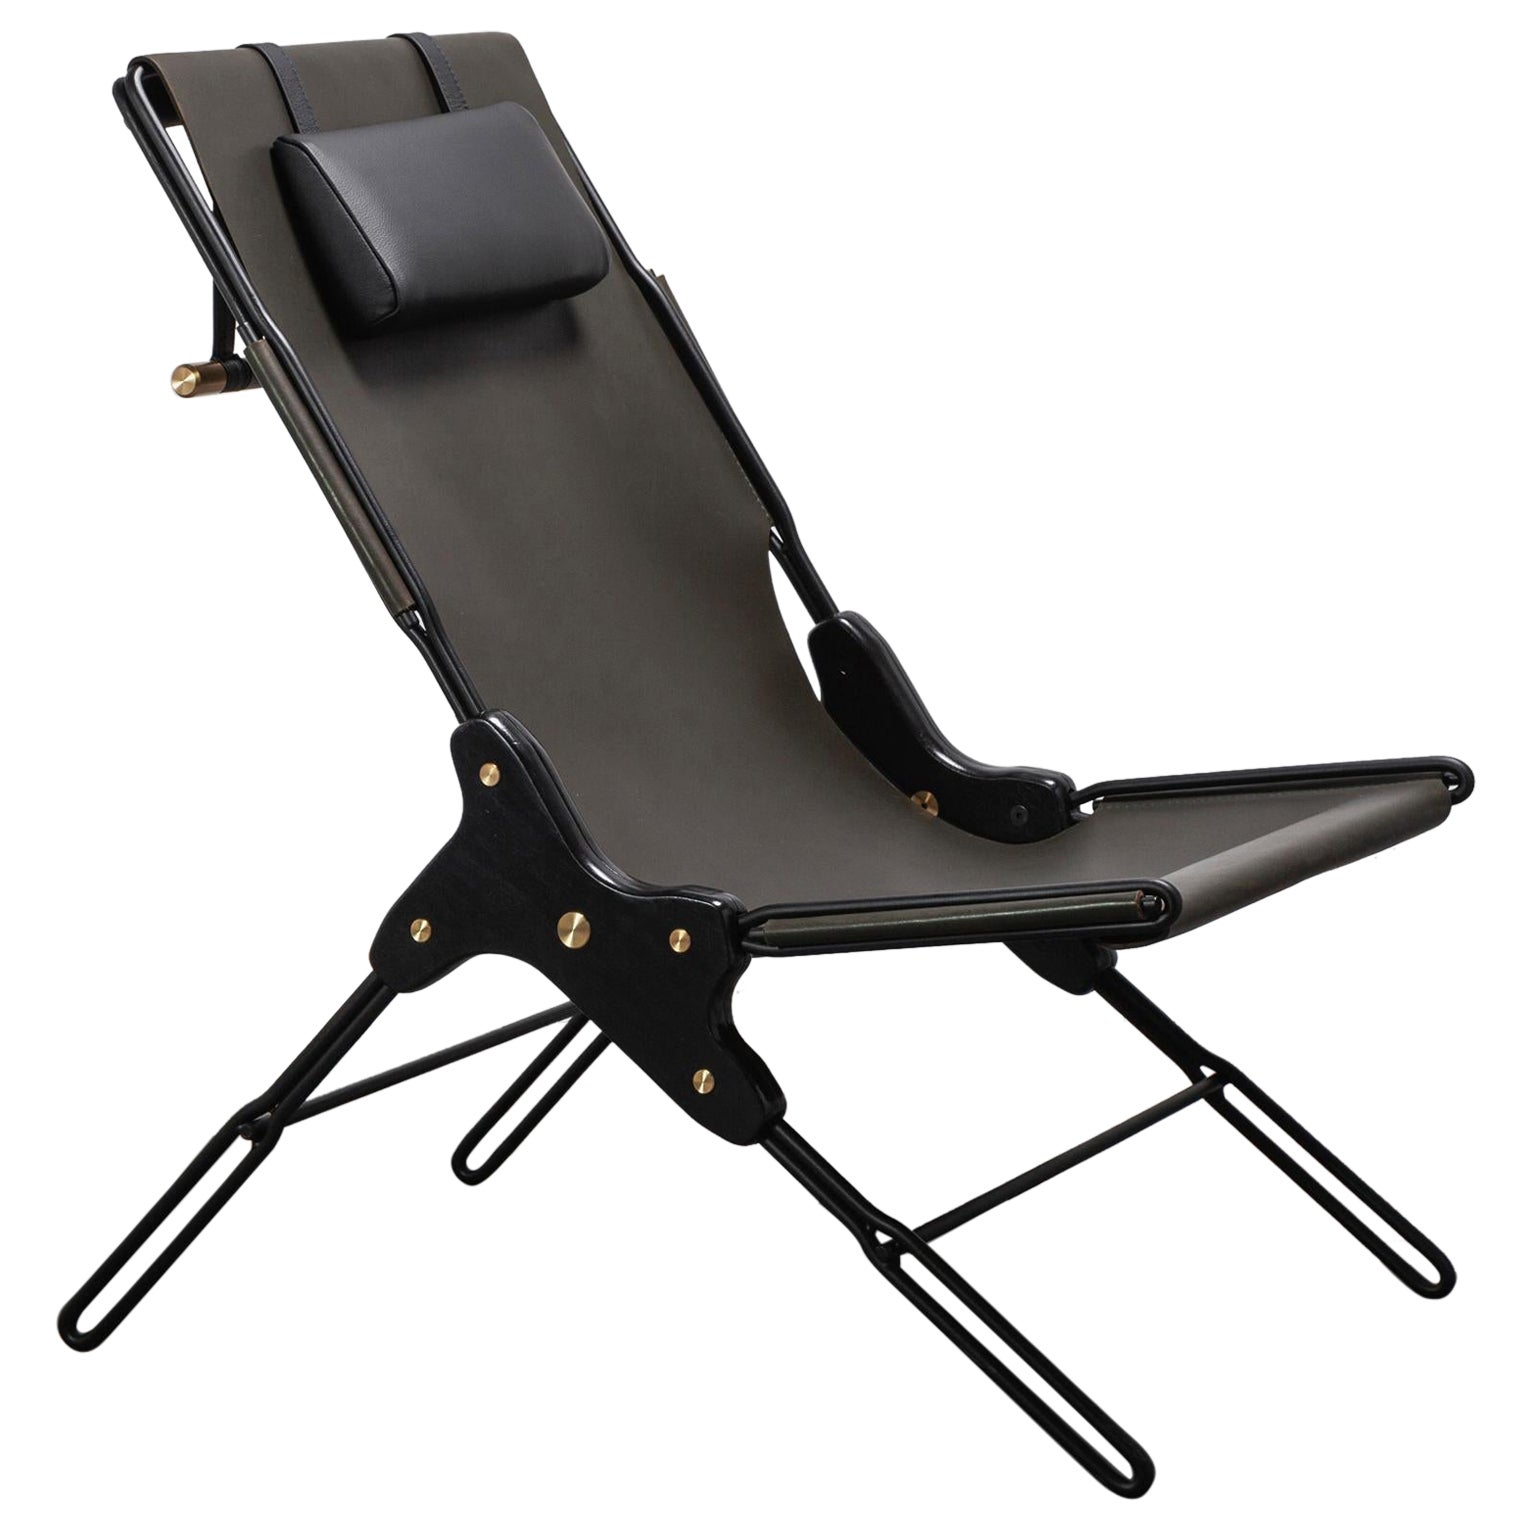 PERFIDIA_01 Olivo Thick Leather Sling Lounge Chair in Black Steel by ANDEAN For Sale